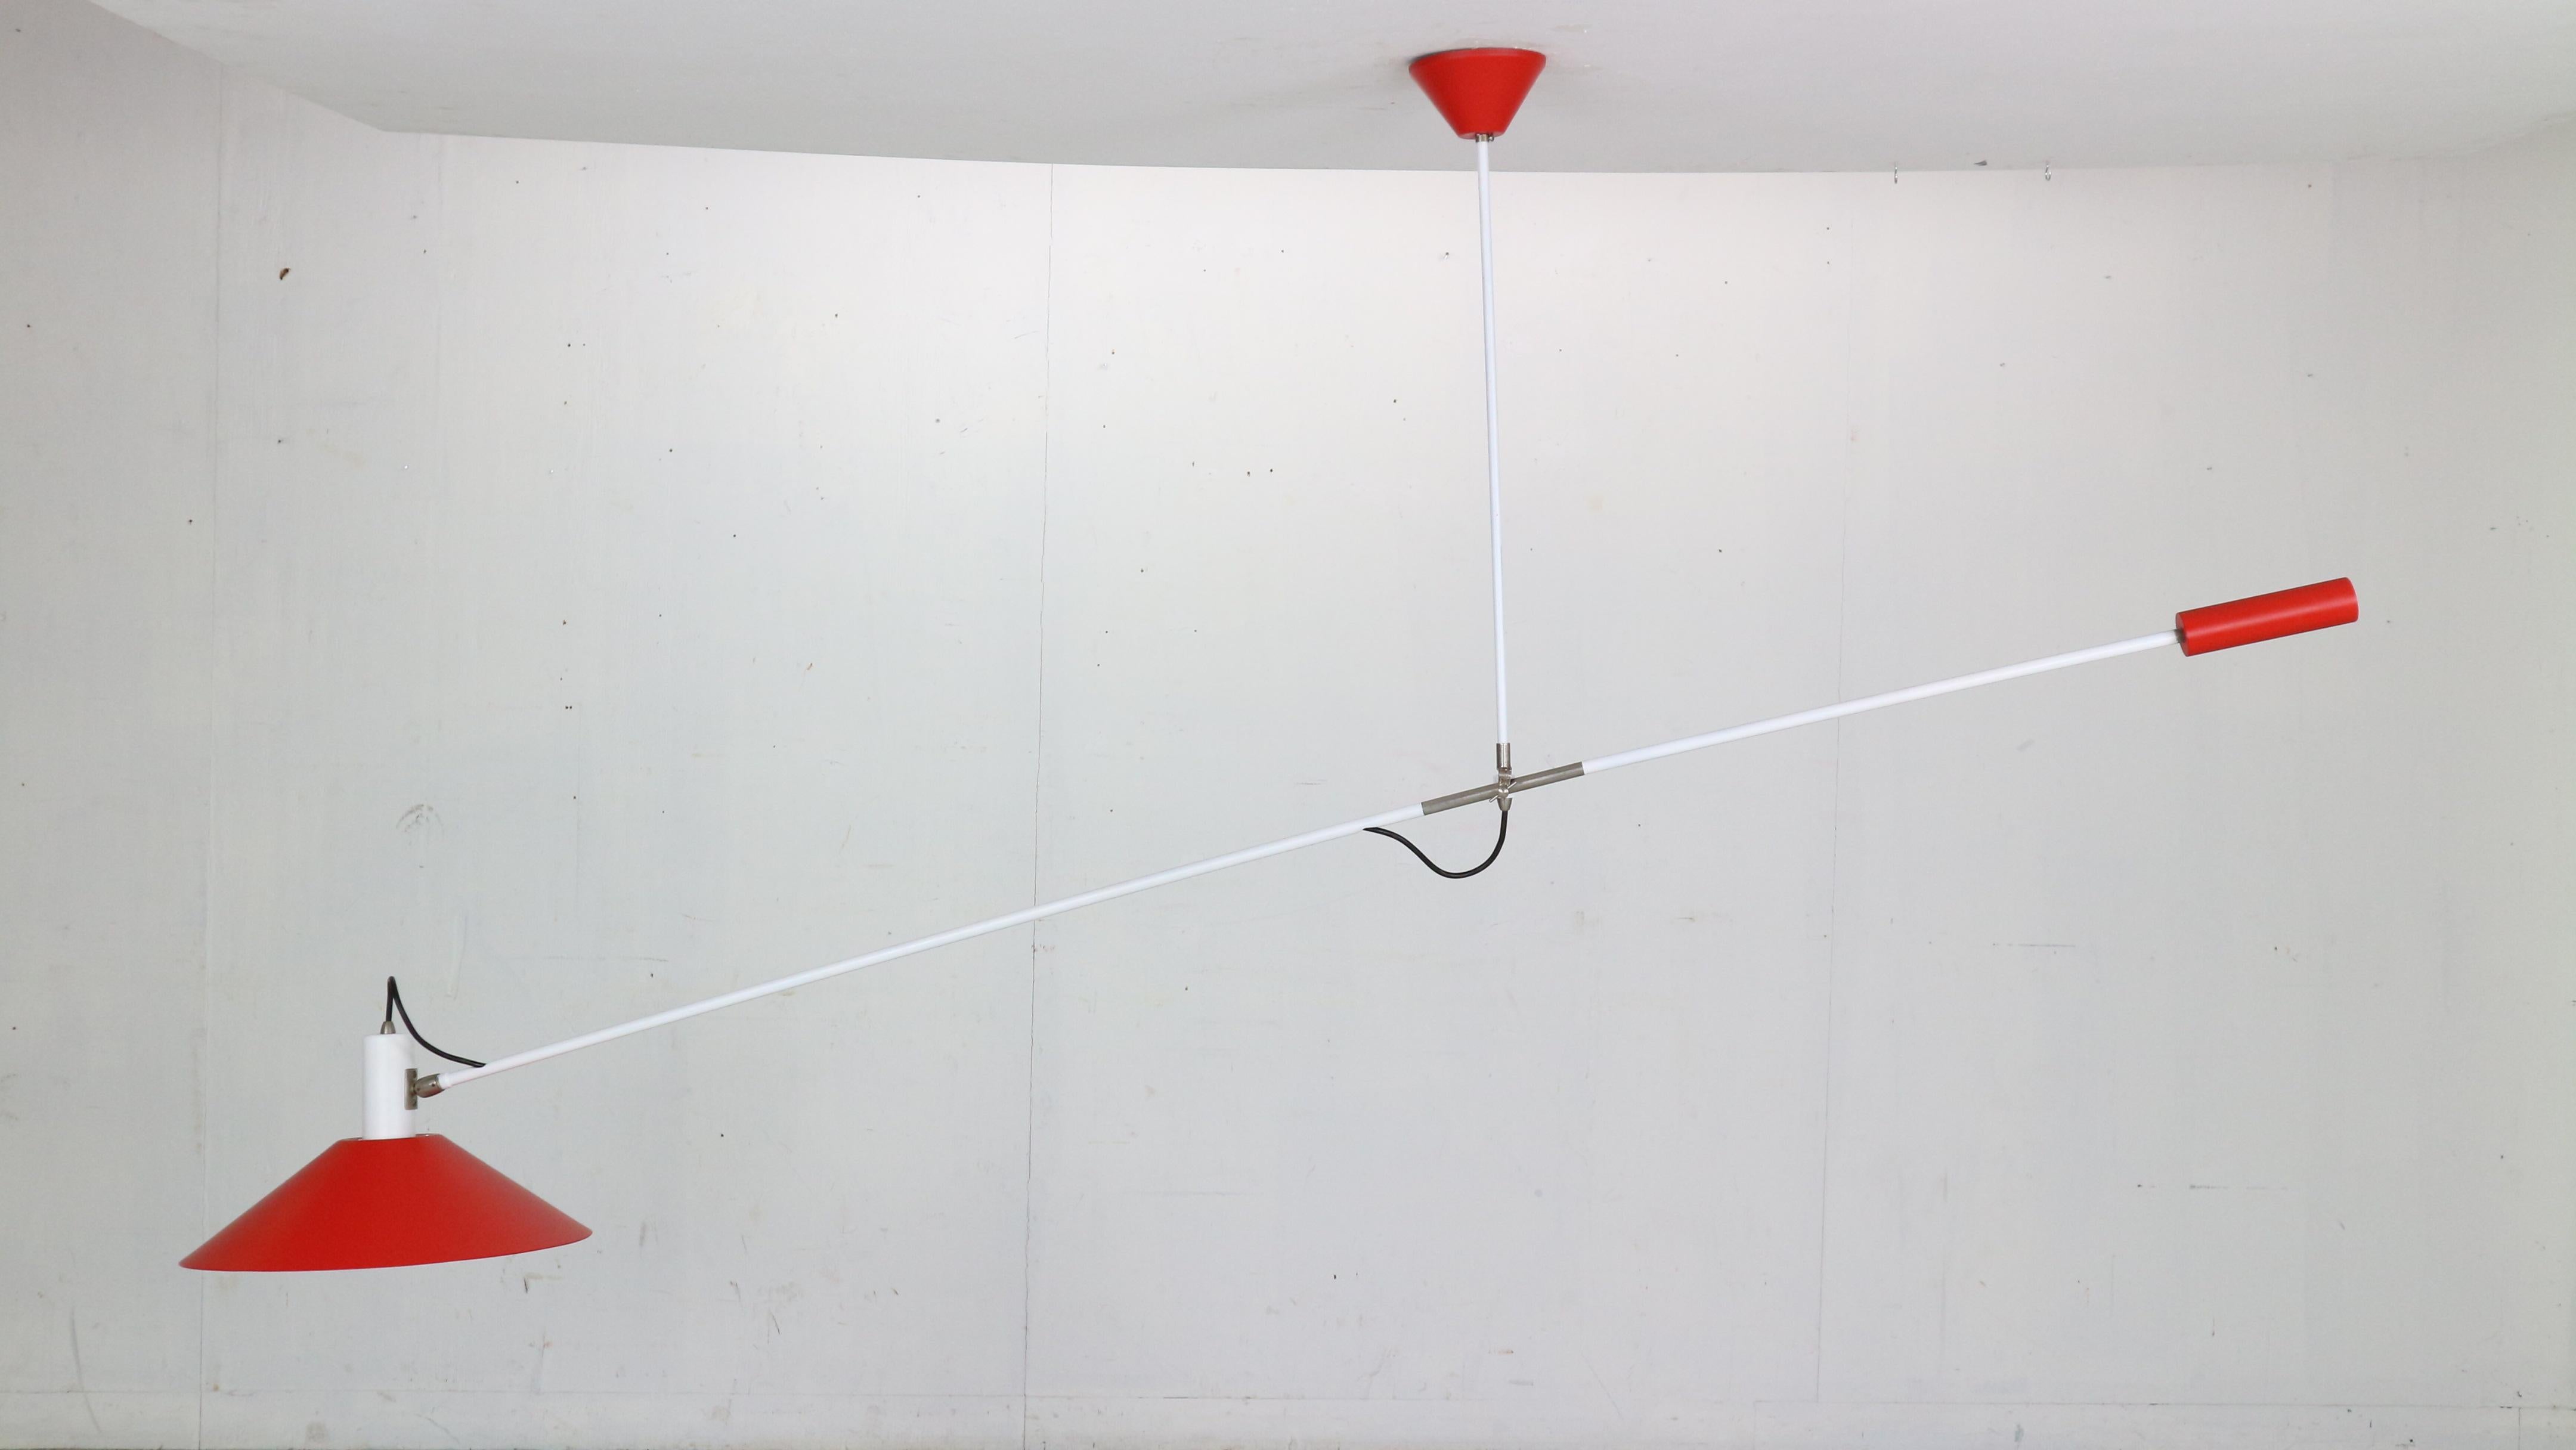 First edition sculptural counter balance ceiling lamp designed by JJM Hoogervorst for Anvia Almelo, Holland, 1957. 

This amazing lamp has a white lacquered arm and red shade and weight (which has been professionally repainted in it's original red